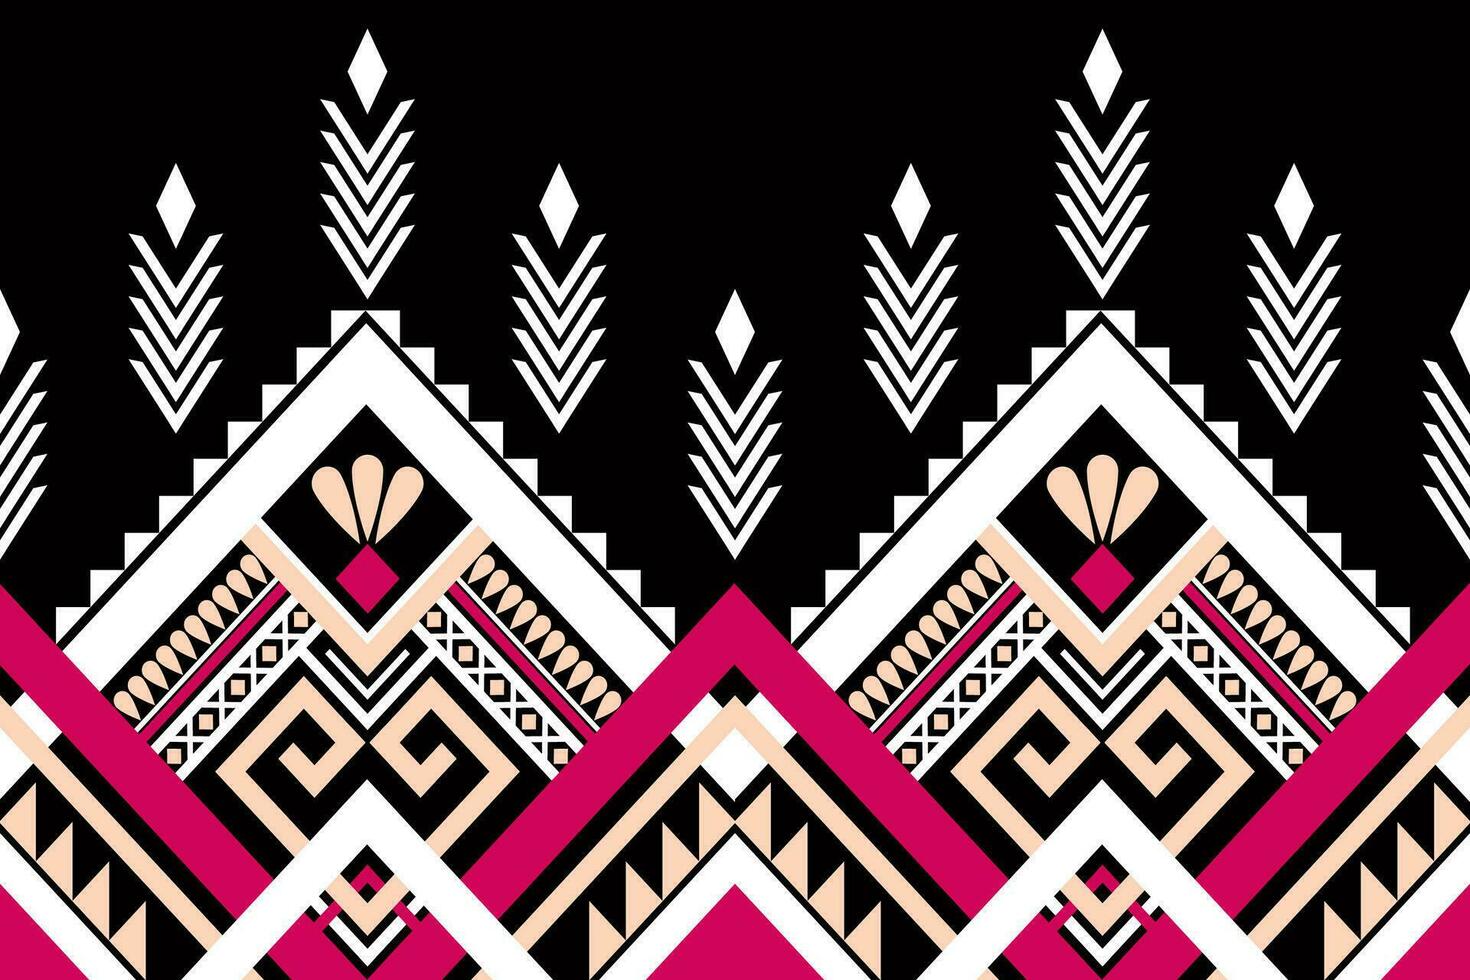 ethnic geometric seamless pattern. Geometric dark black background. Design for fabric, clothes, decorative paper, wrapping, textile, embroidery, illustration, vector